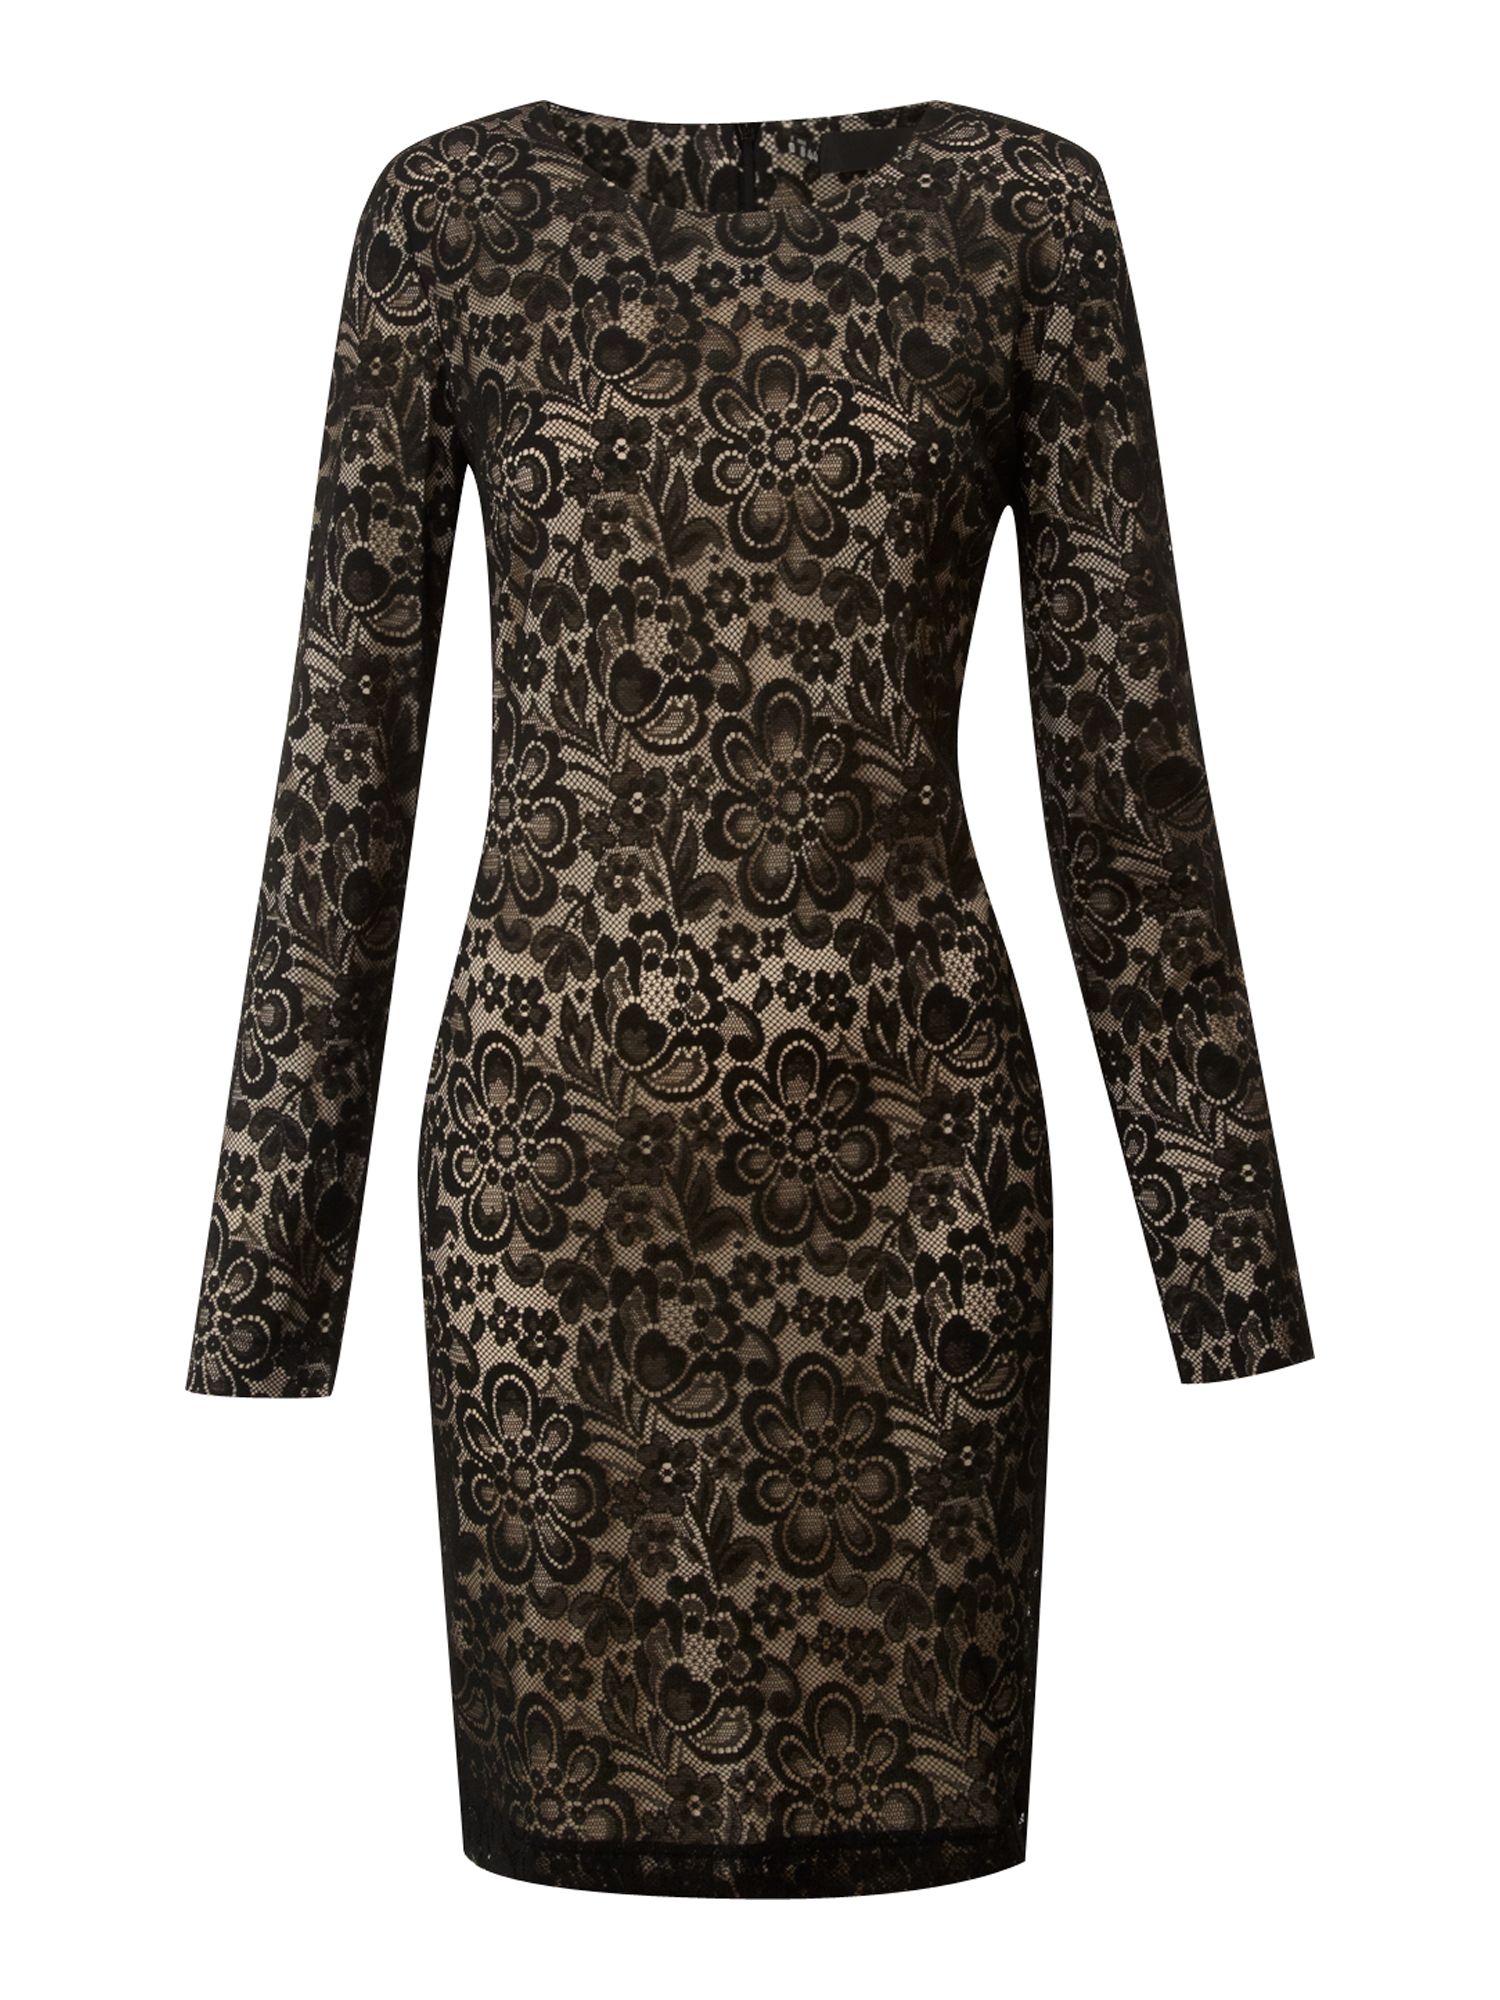 Love Moschino Long Sleeved Dress with Lace Overlay in Black | Lyst